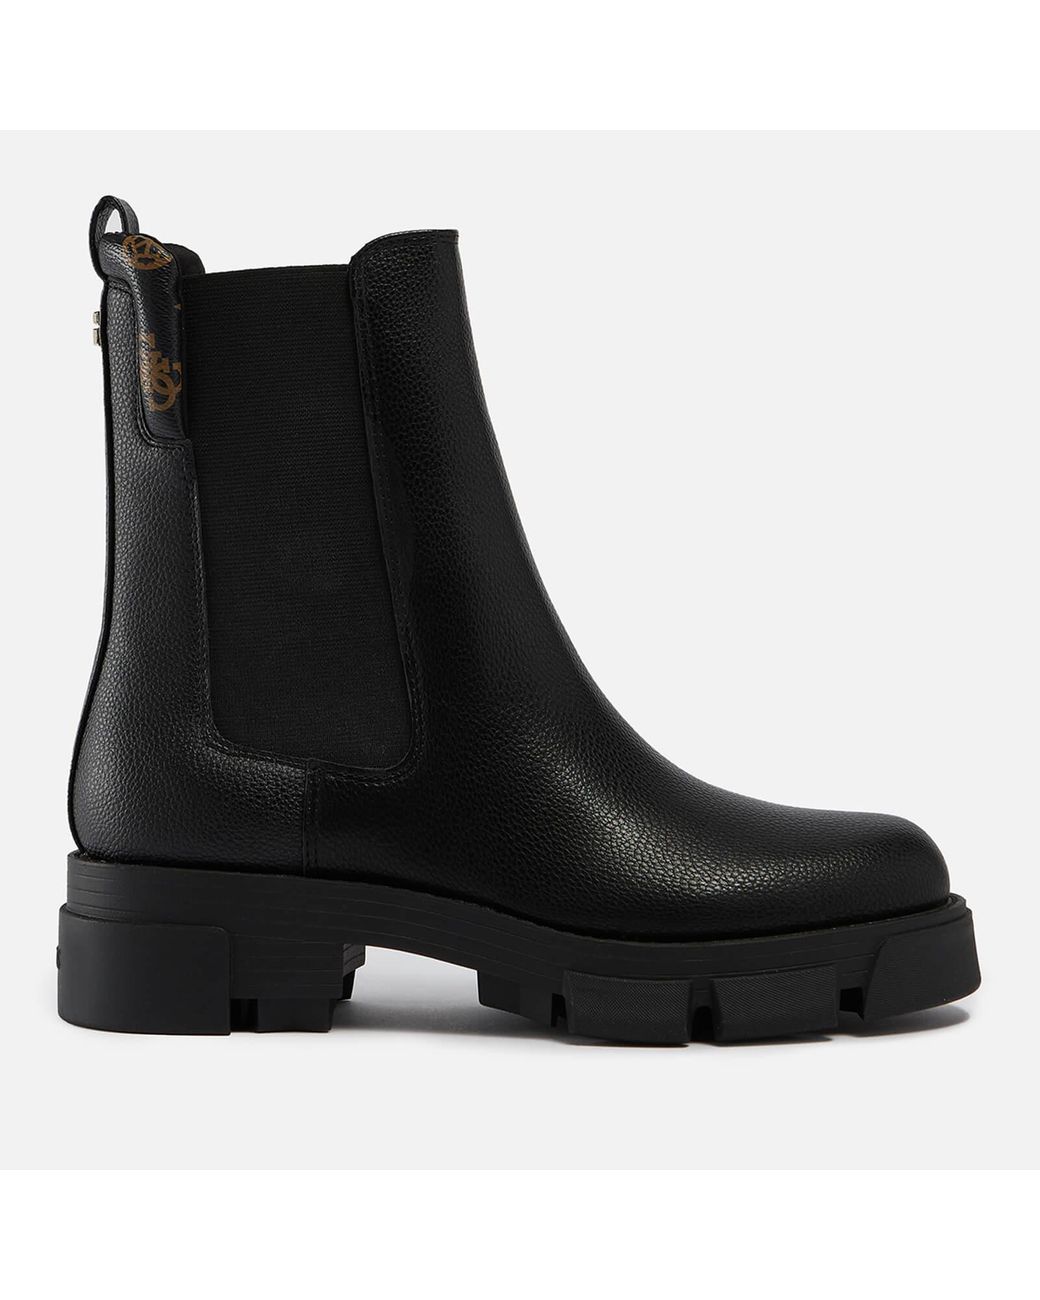 Guess Madla Leather Chelsea Boots in Black | Lyst